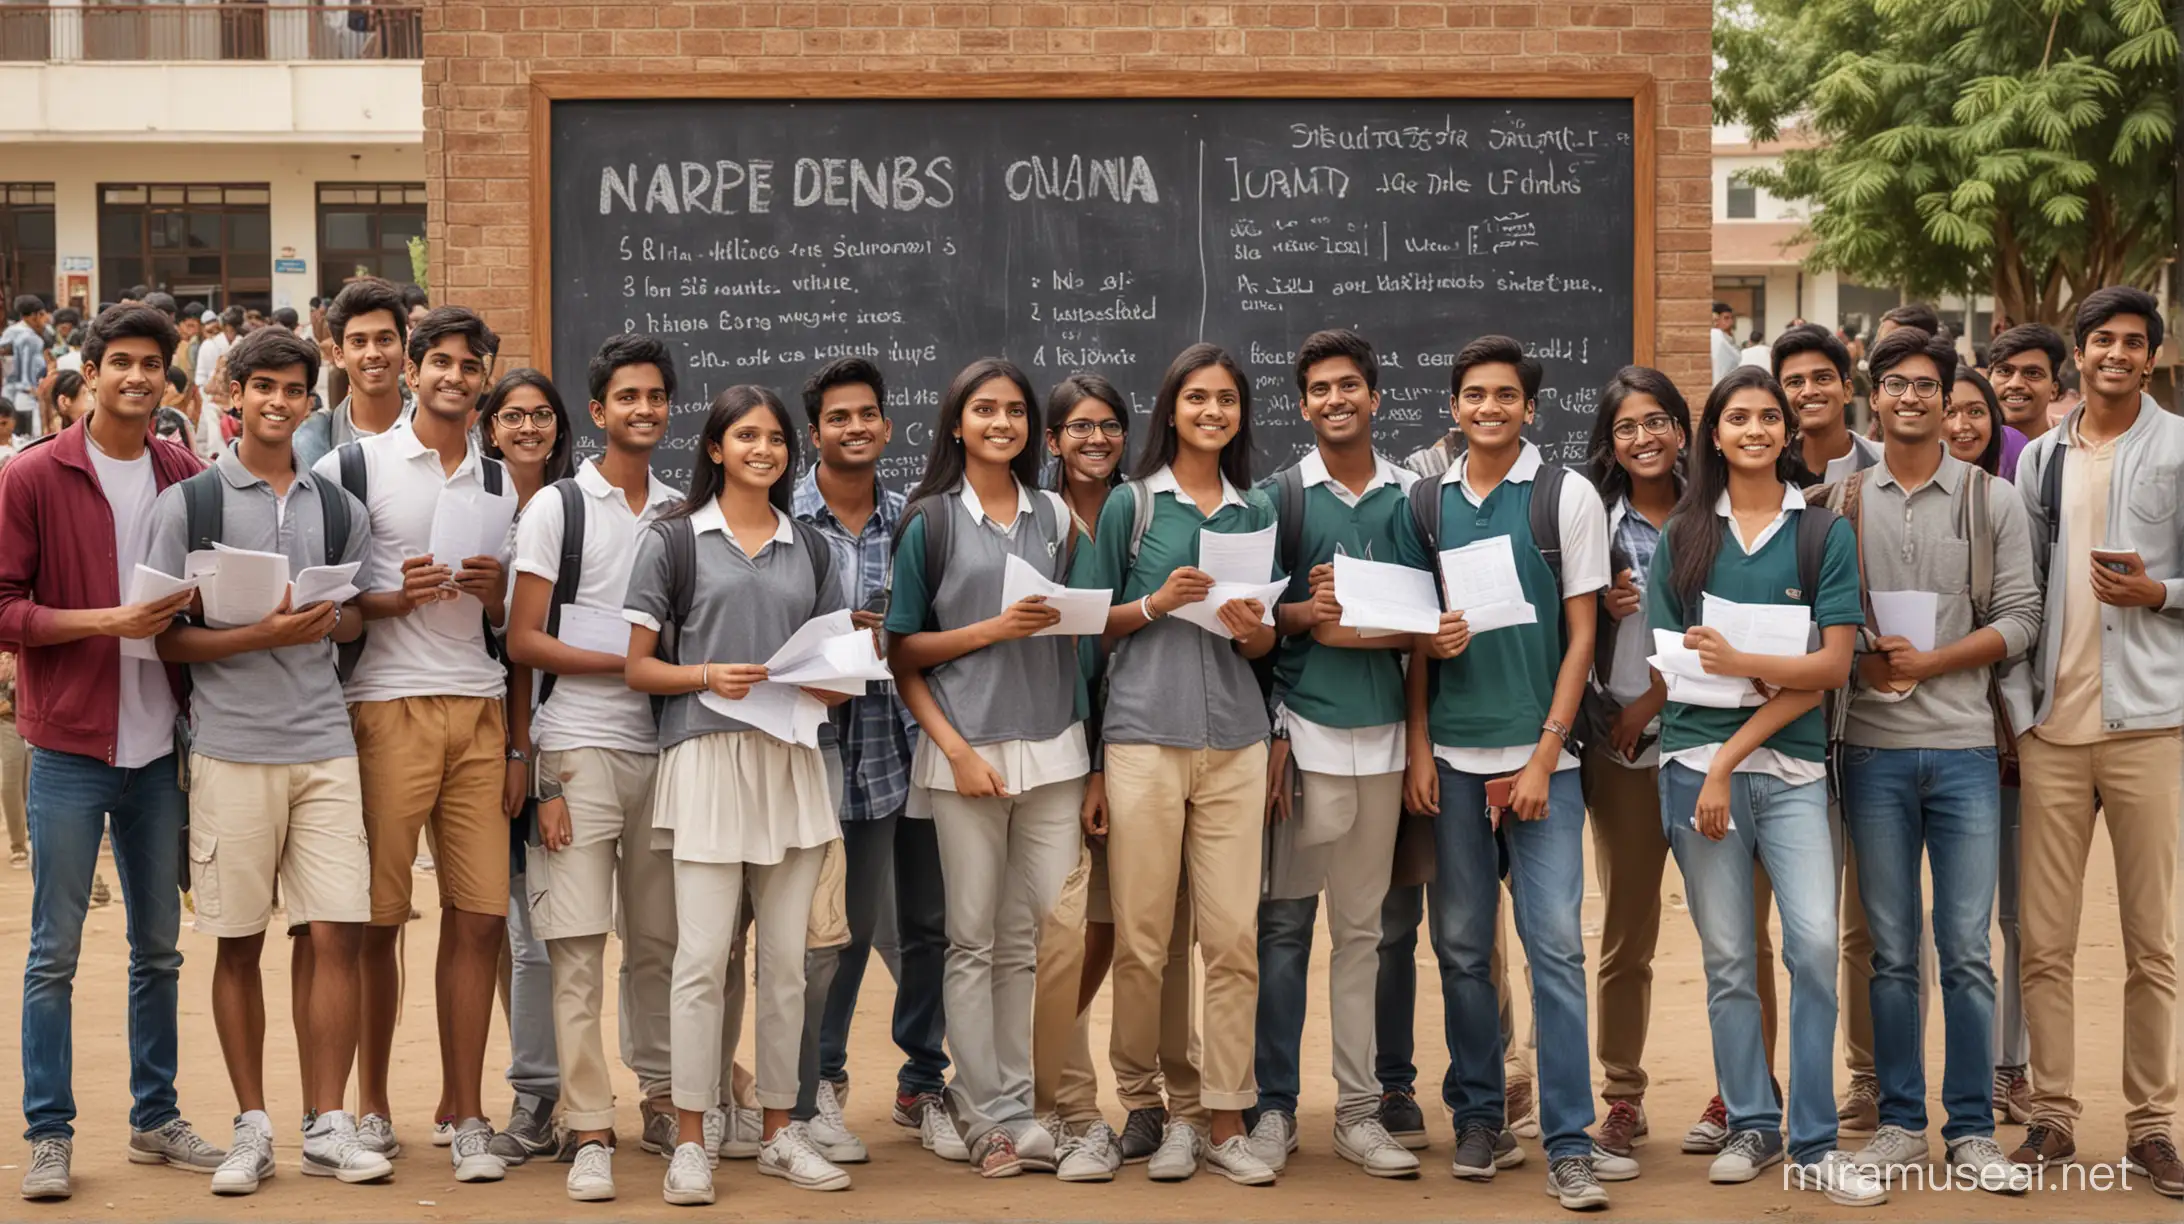 Generate an image showing a group of indian students, standing in front of a school or college. The notice board in background is filled with exam schedules, club activities, and announcements, highlighting the vibrant student life in India, hyper detailed, hyper realistic portraits